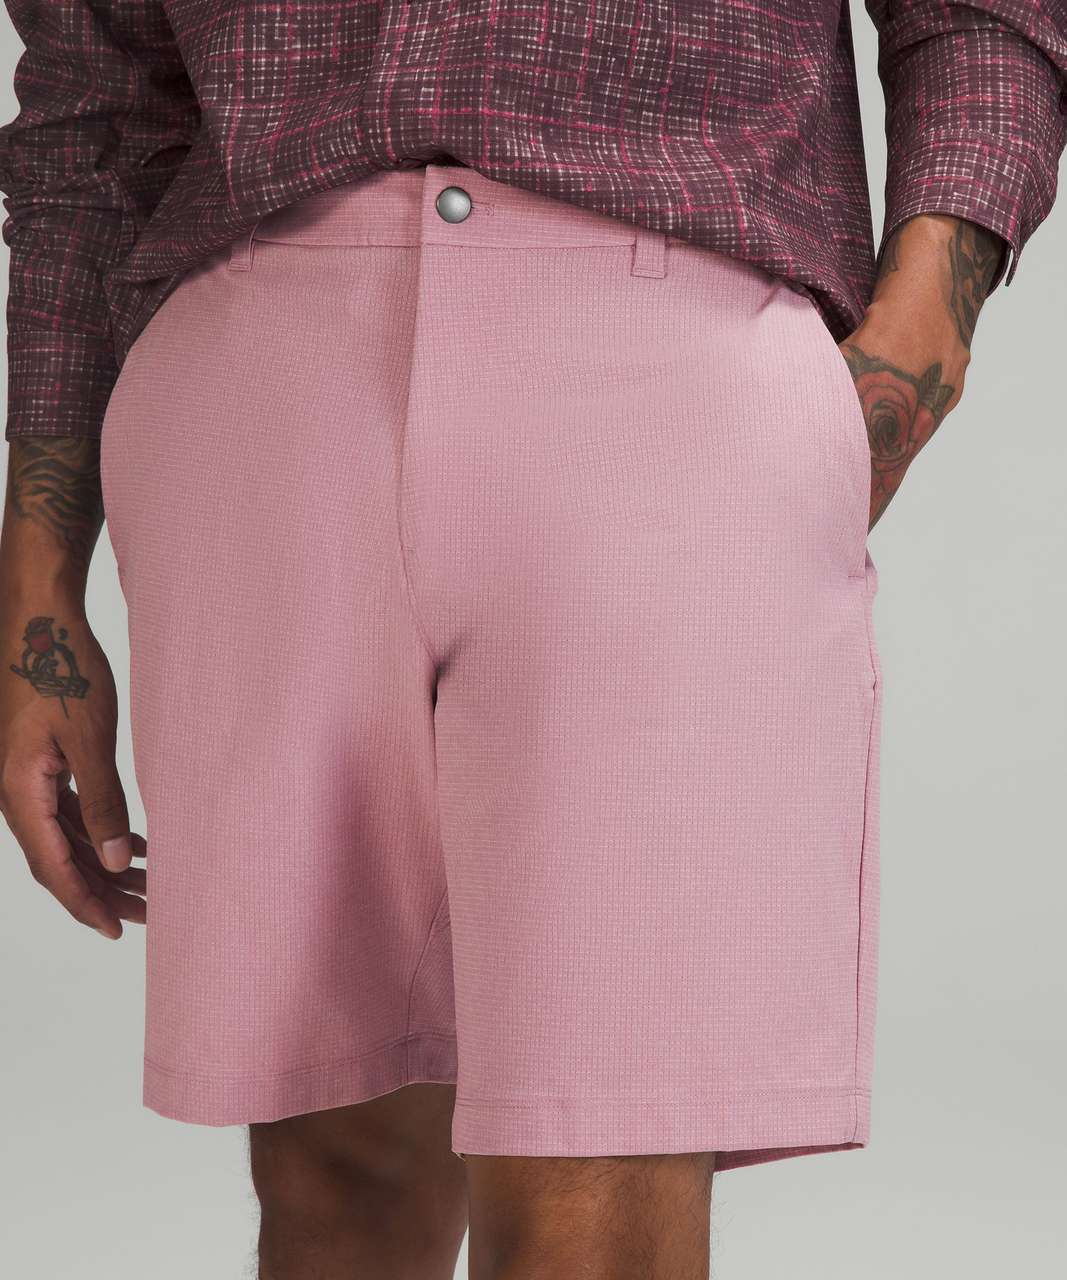 Lululemon Commission Classic-Fit Short 9" Ventlight - Heathered Pink Taupe